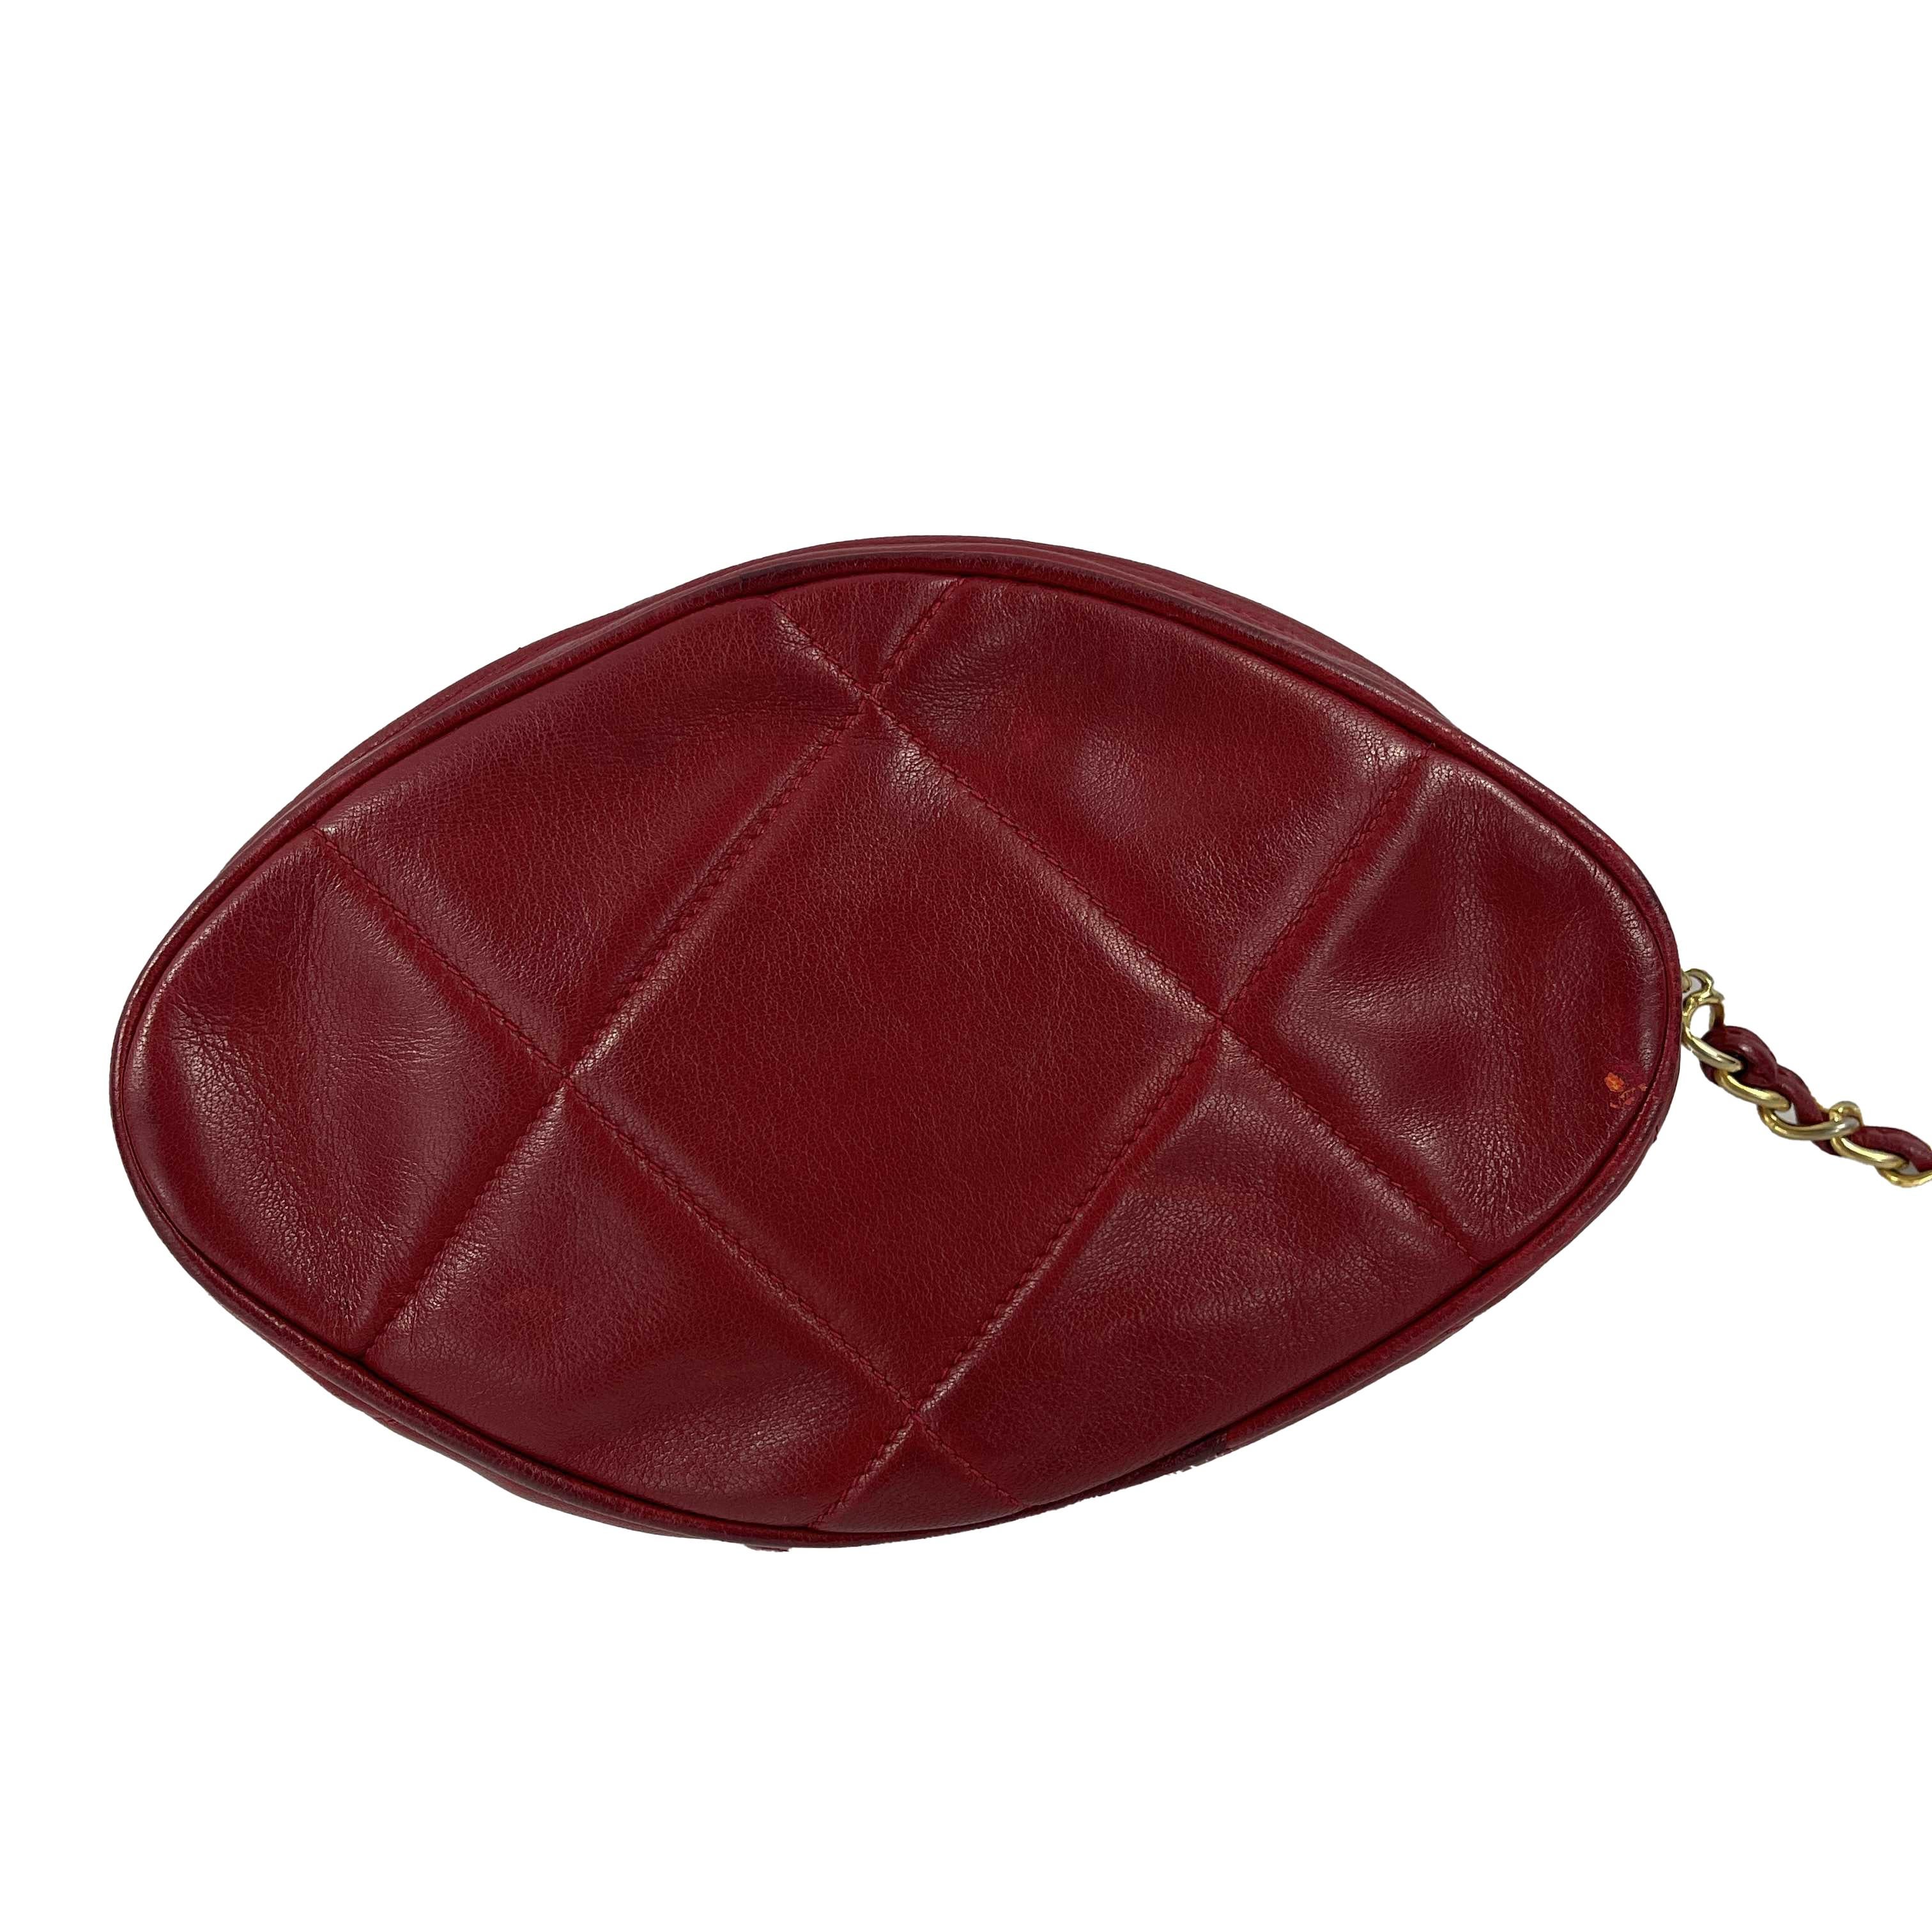 CHANEL - Vintage Quilted Leather CC Oval Red / Gold Tassel Clutch

Description

From the 1989 to 1991 collection.
This vintage Chanel clutch is crafted with red quilted leather and gold-toned hardware.
The frontside features the iconic interlocking